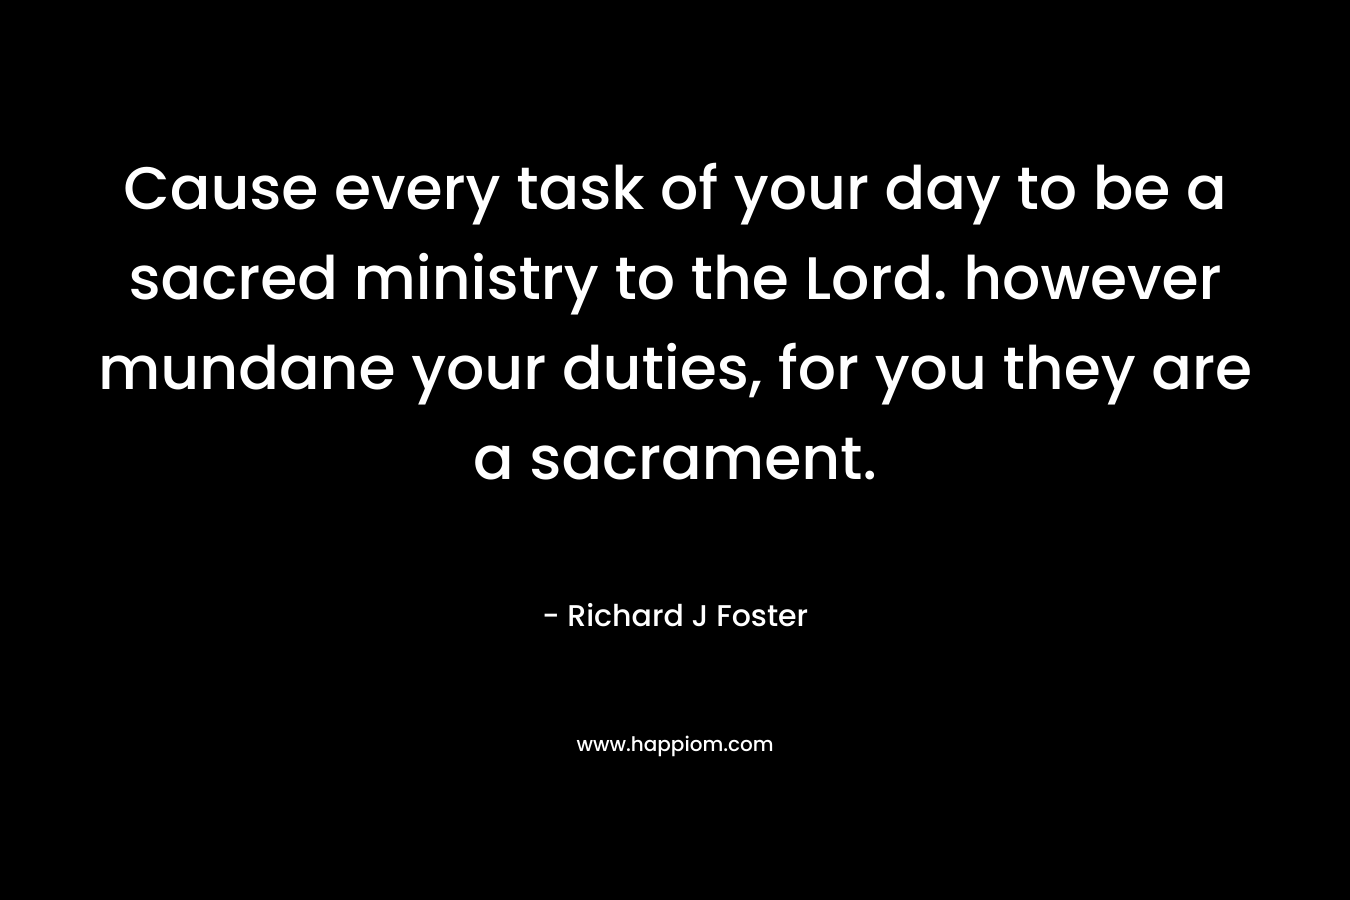 Cause every task of your day to be a sacred ministry to the Lord. however mundane your duties, for you they are a sacrament. – Richard J Foster